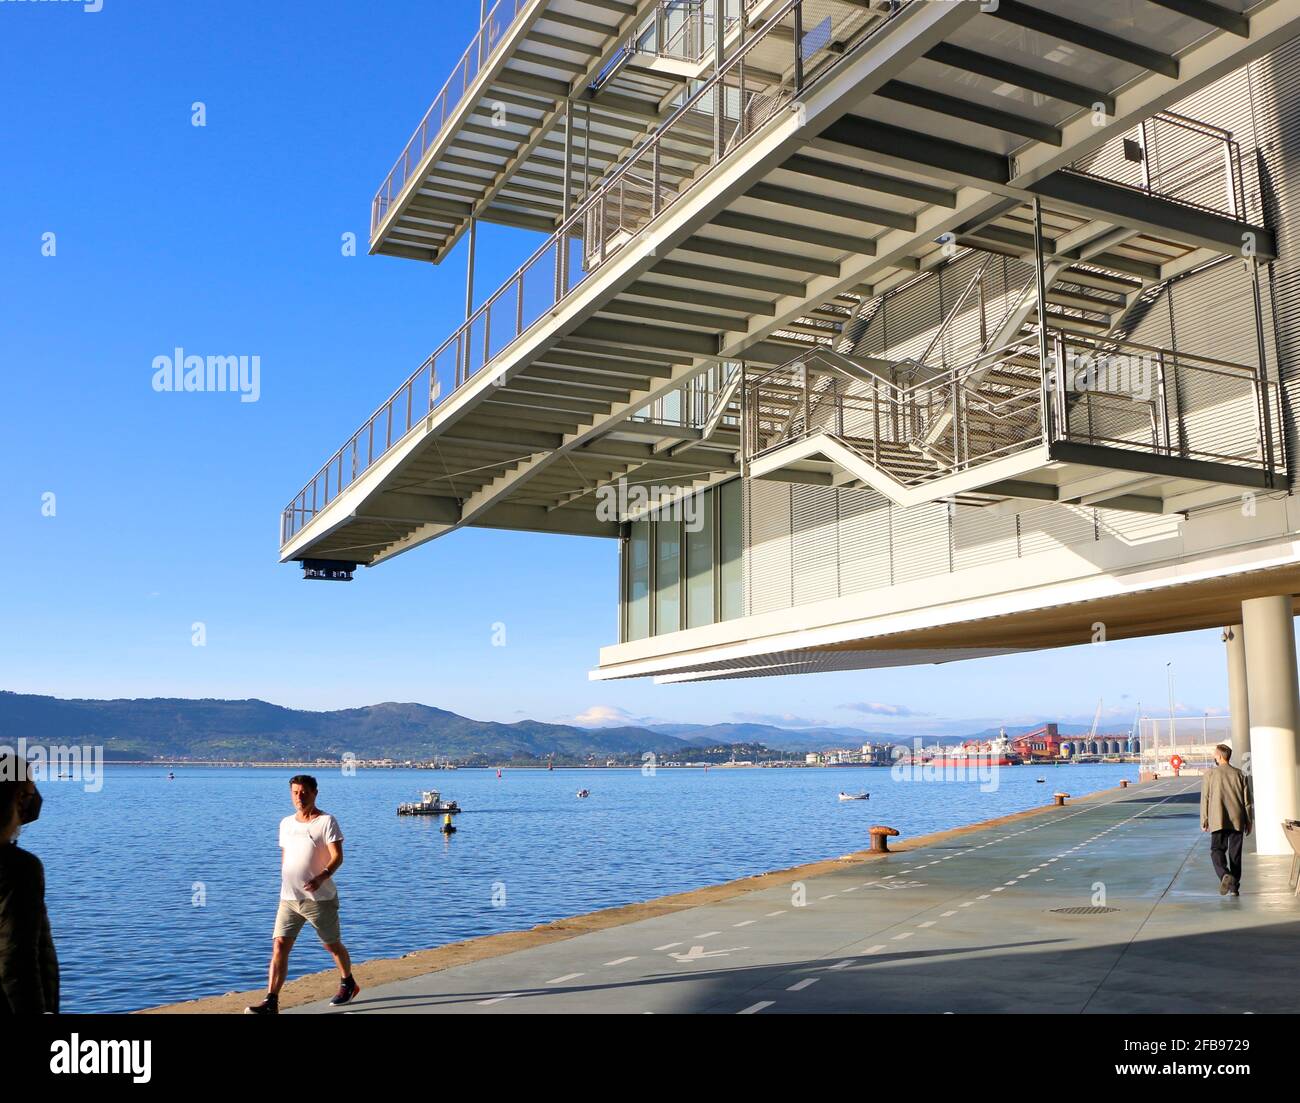 People out for a morning walk under walkways at the Centro Botin Centre Arts Centre designed by Renzo Piano in Santander Cantabria Spain Stock Photo